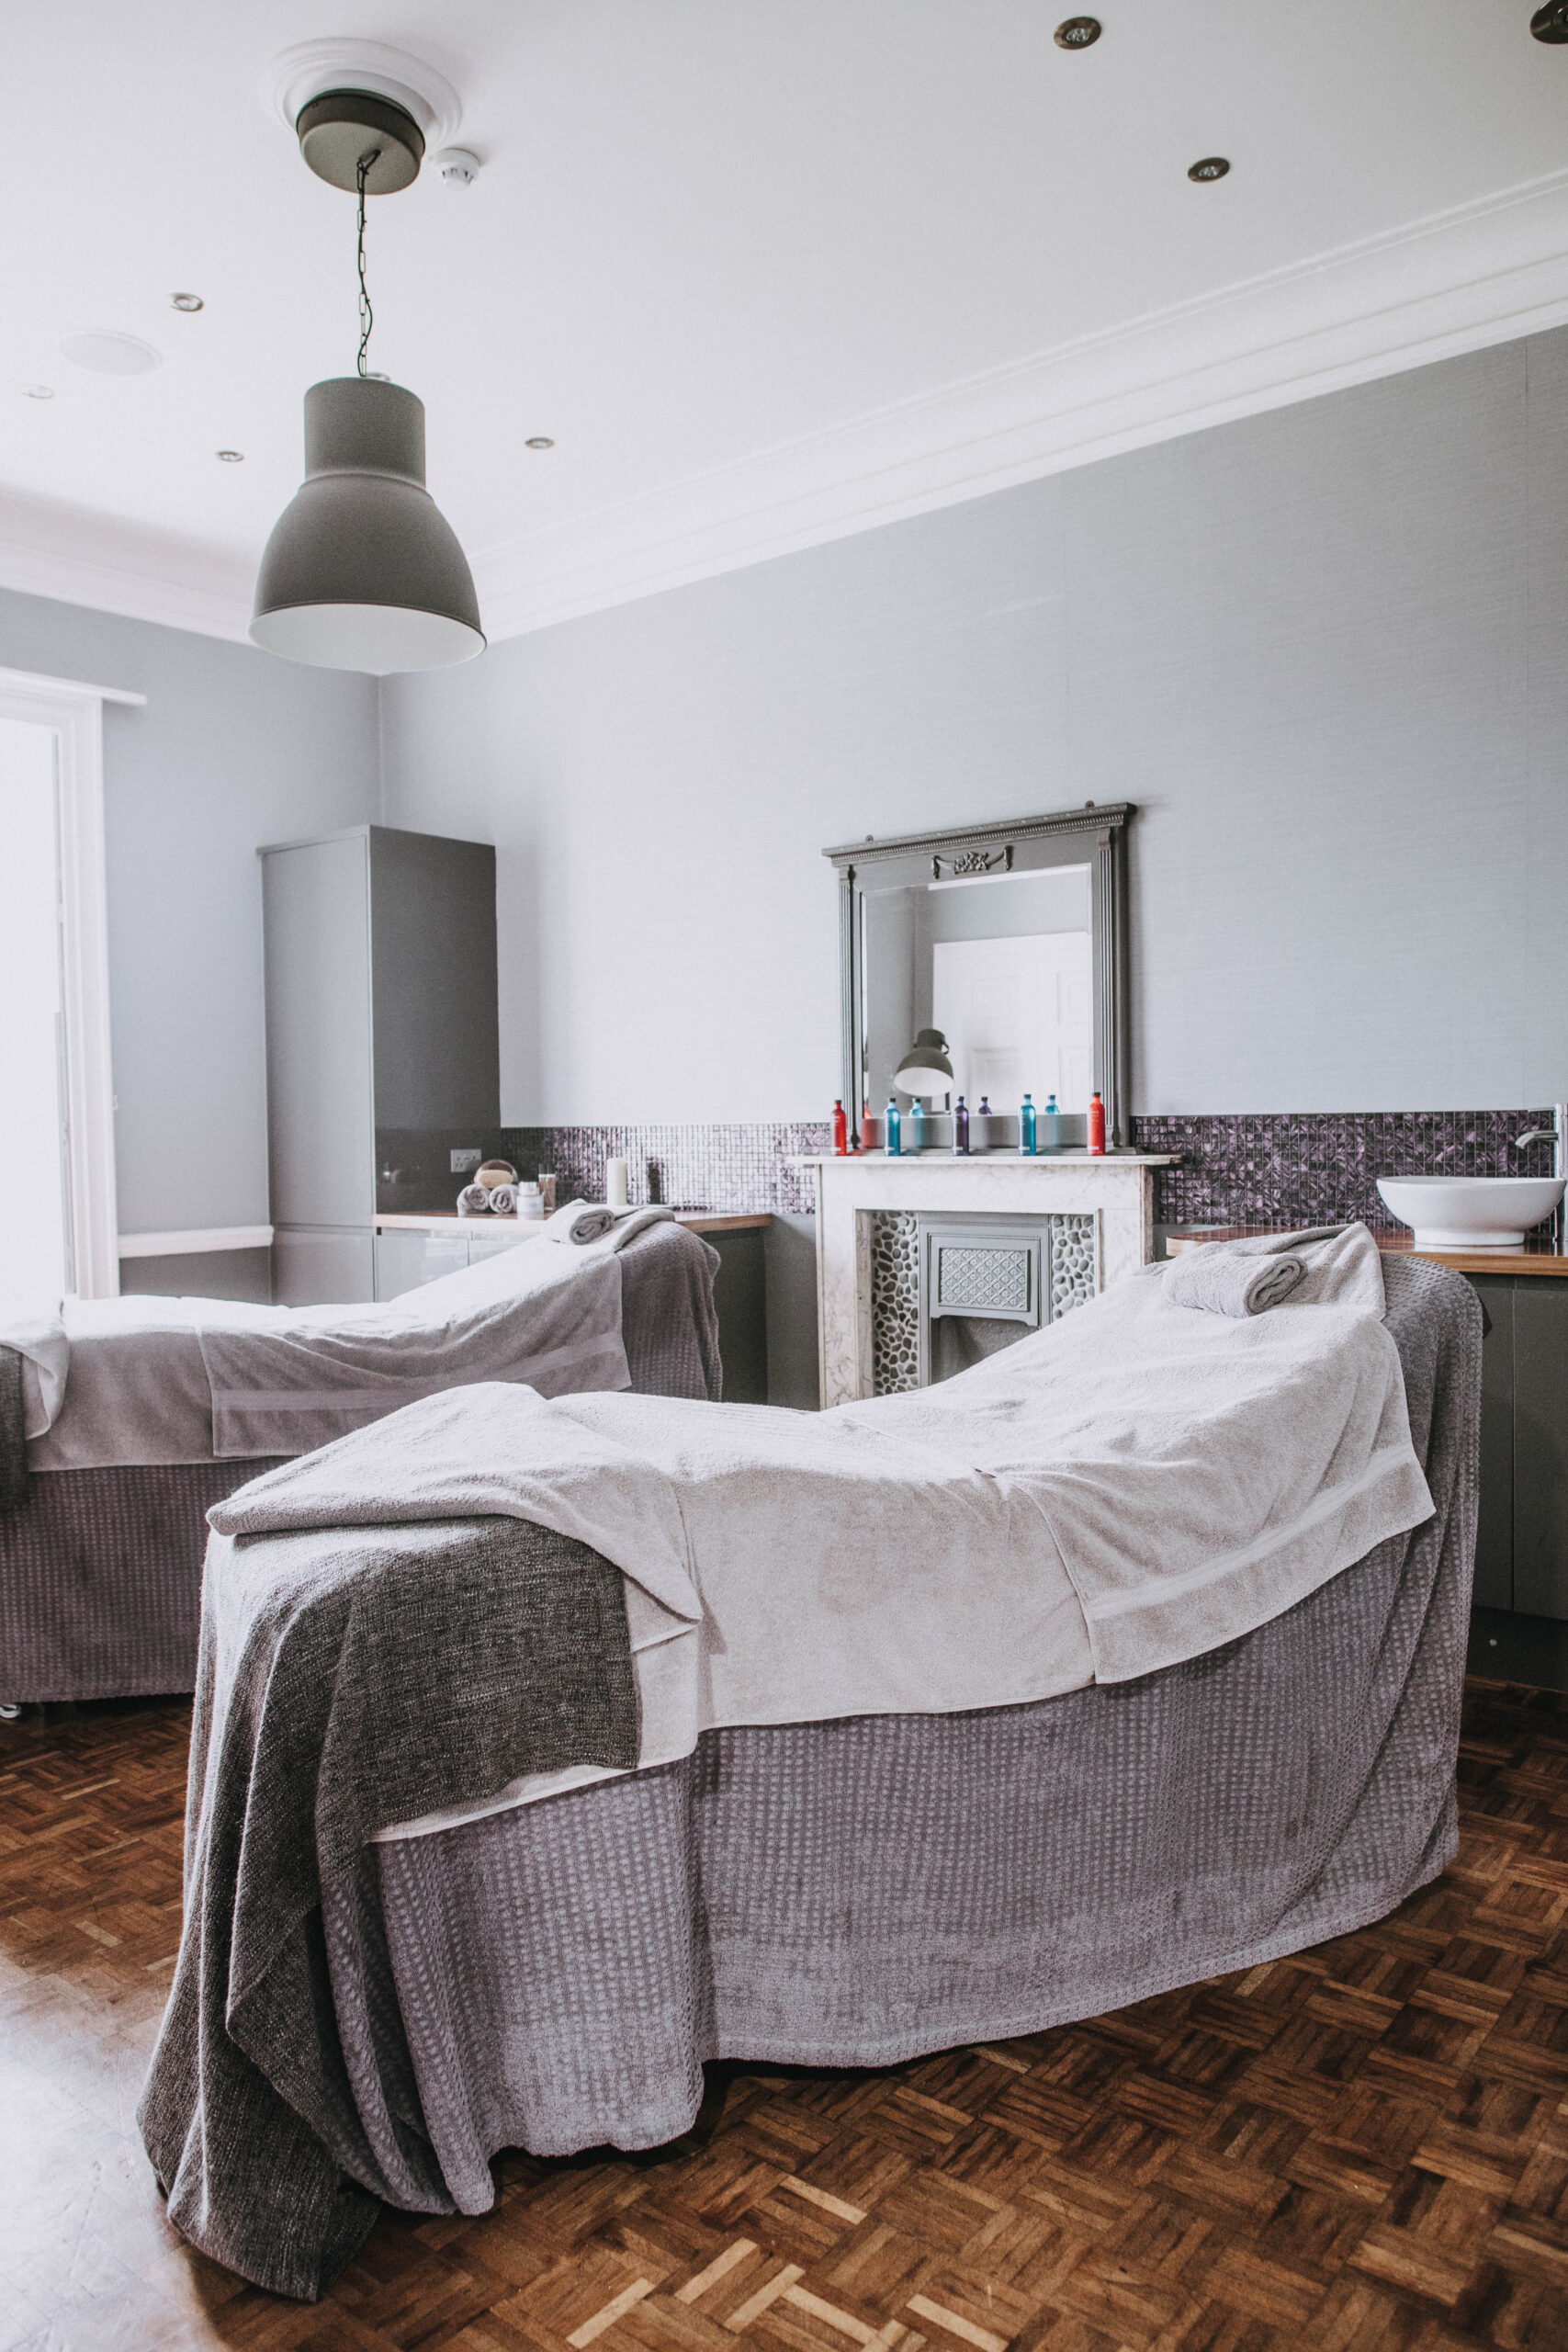 beauty salon treatments exeter, wear park spa, nails exeter, exeter nail salon, waxing exeter, lashes exeter, lash lift exeter, eyebrows exeter, brows exeter, beauty exeter, beauty treatment exeter, exeter golf and country club